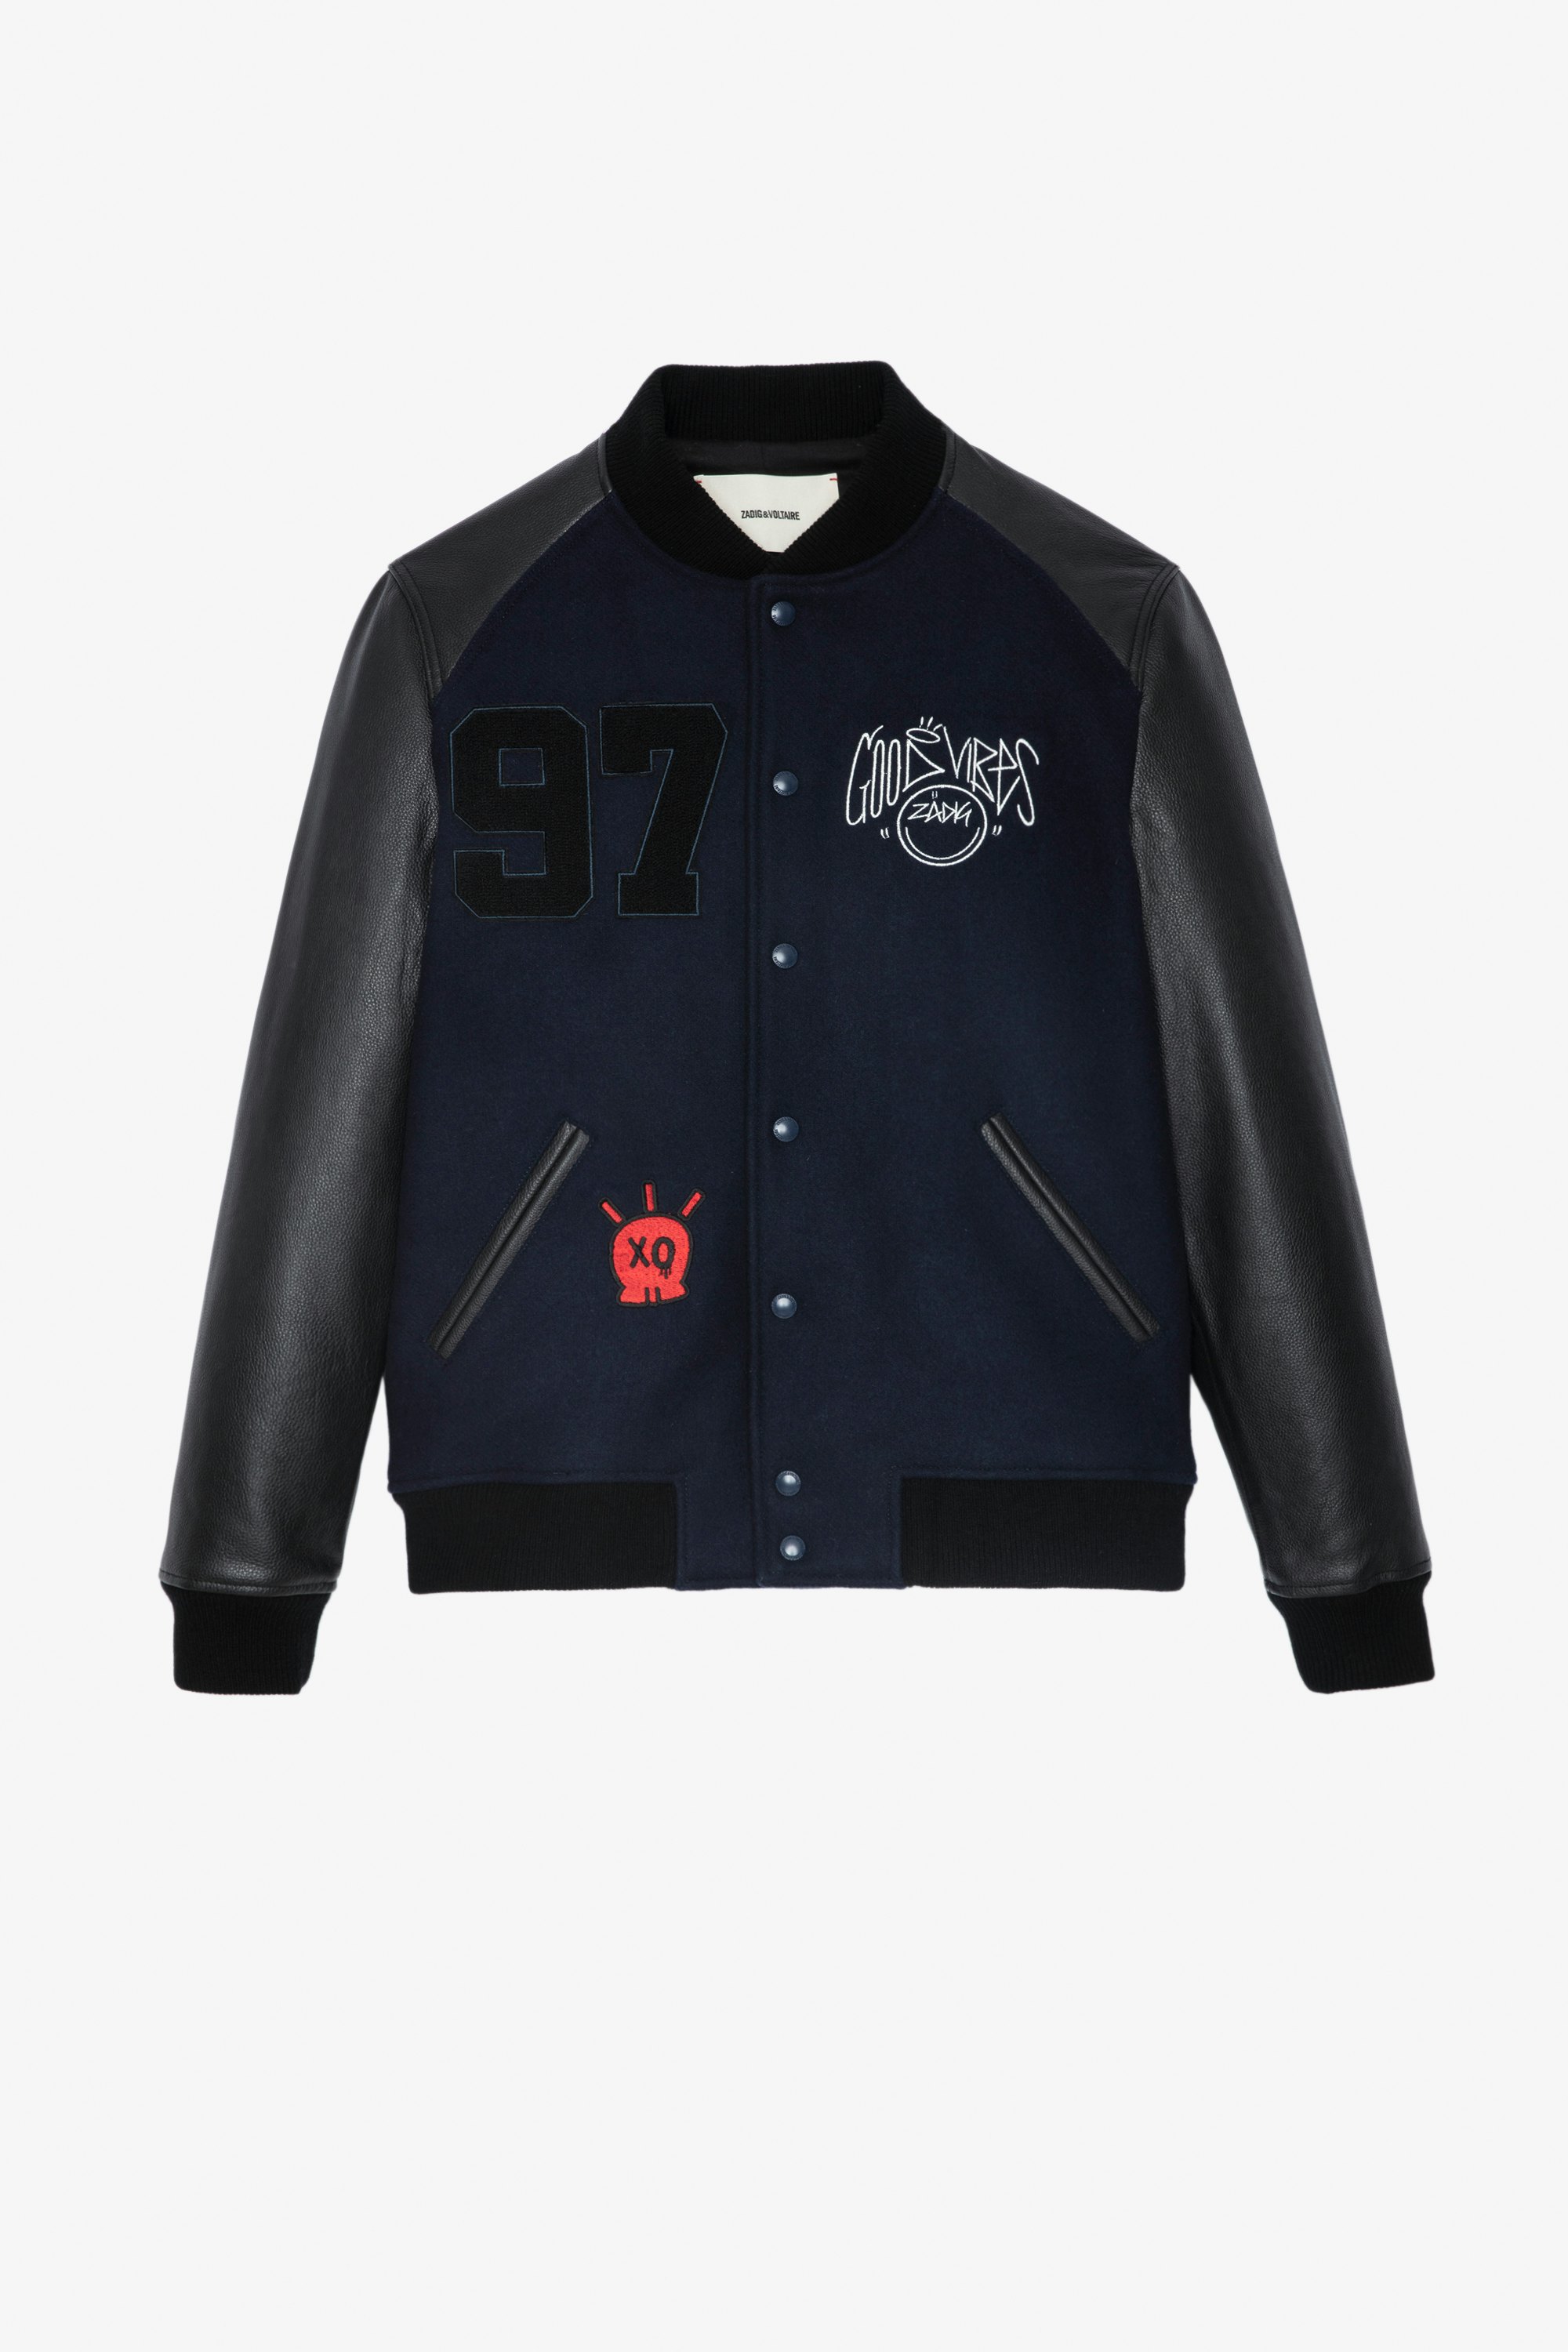 Birdieh Bomber Jacket Men’s bomber jacket in black leather and navy-blue wool with patches and embroidery